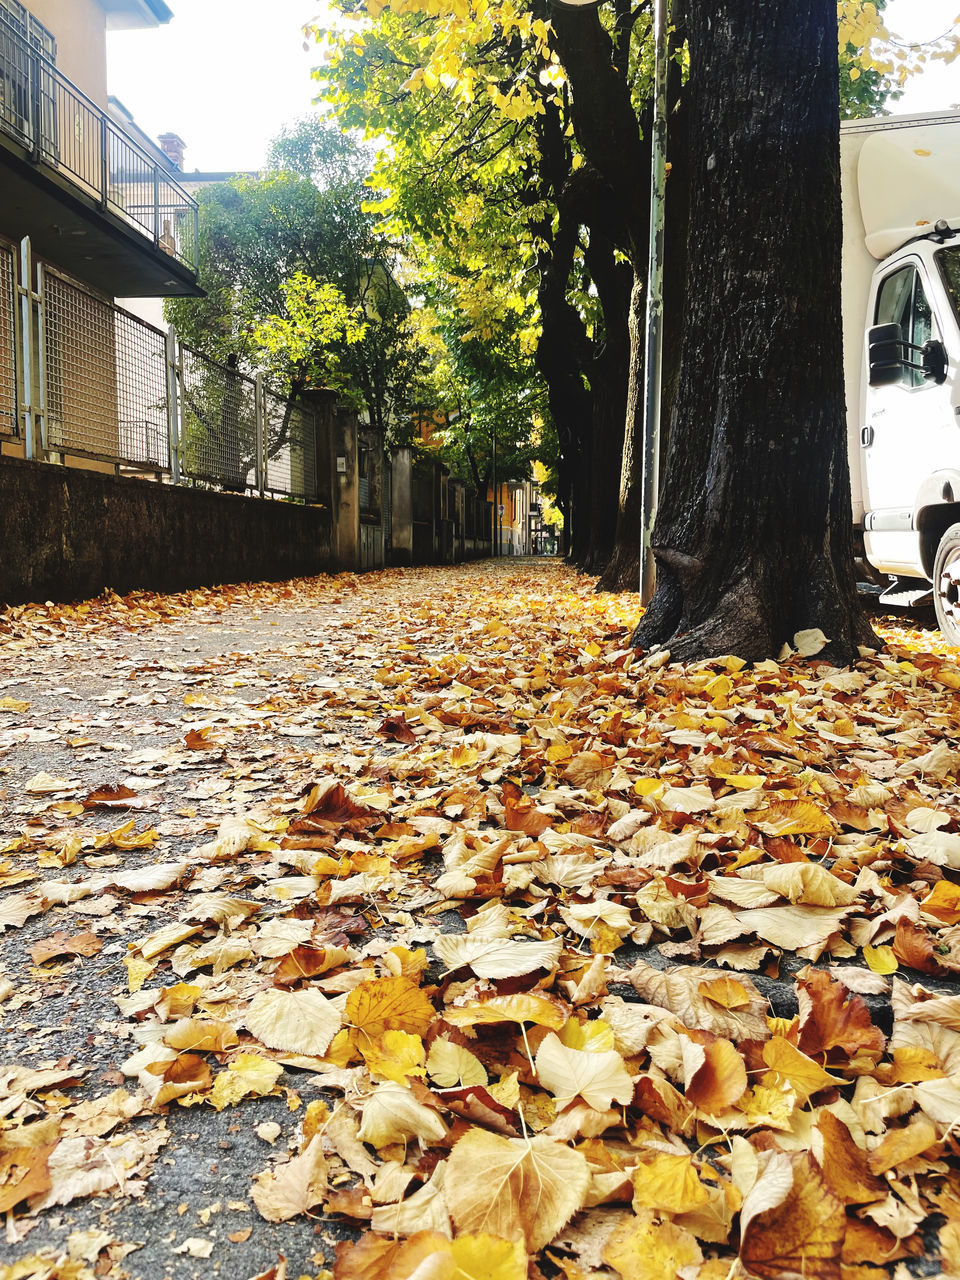 leaf, plant part, autumn, tree, leaves, nature, falling, architecture, day, plant, dry, built structure, city, building exterior, no people, car, street, outdoors, wheel, yellow, land vehicle, transportation, motor vehicle, building, mode of transportation, vehicle, footpath